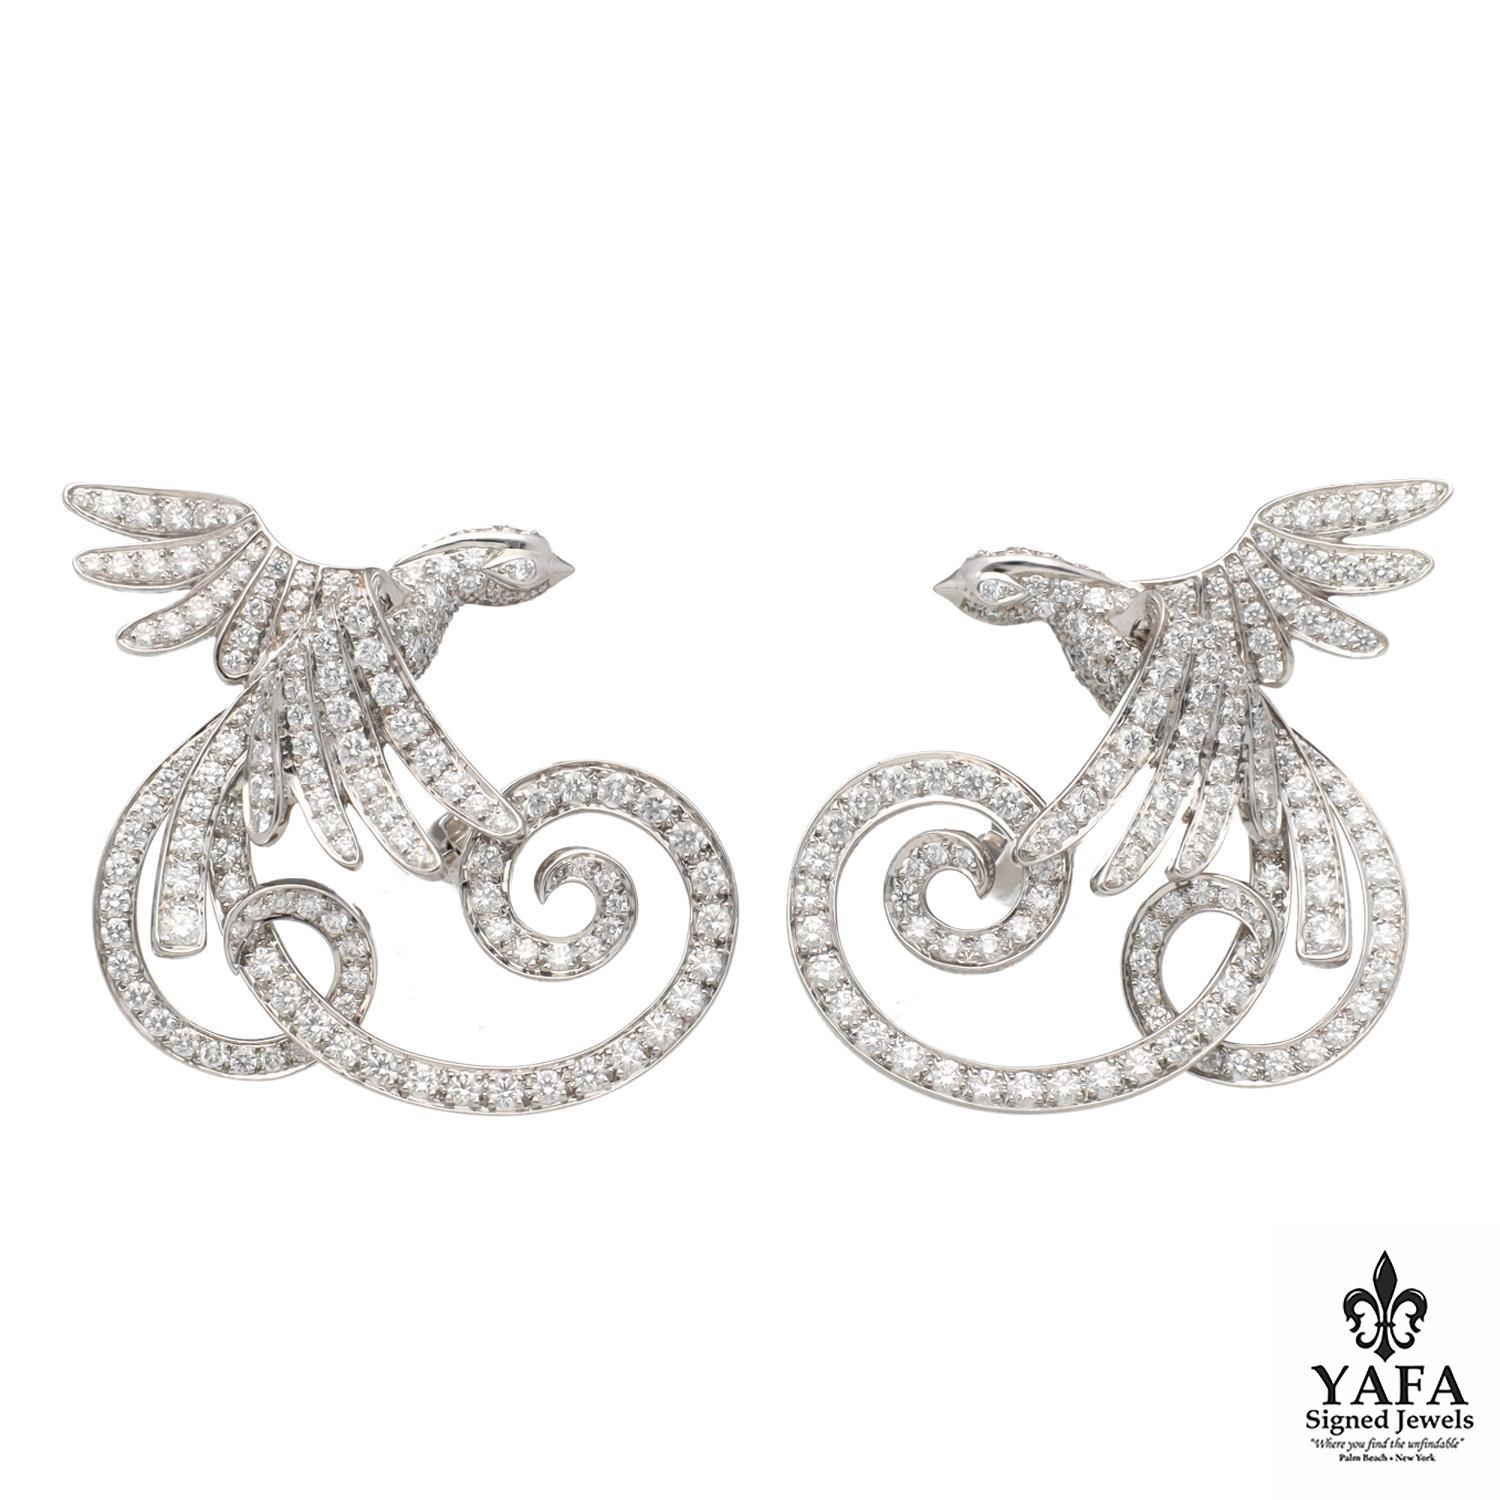 Van Cleef & Arpels Oiseaux de Paradis Earrings - 18K White Gold and Diamond Earrings are a dazzling and elegant representation of the brand's exquisite jewelry inspired by nature. 
Approximate diamond weight 4.02 CTS.
Signed - Van Cleef & Arpels